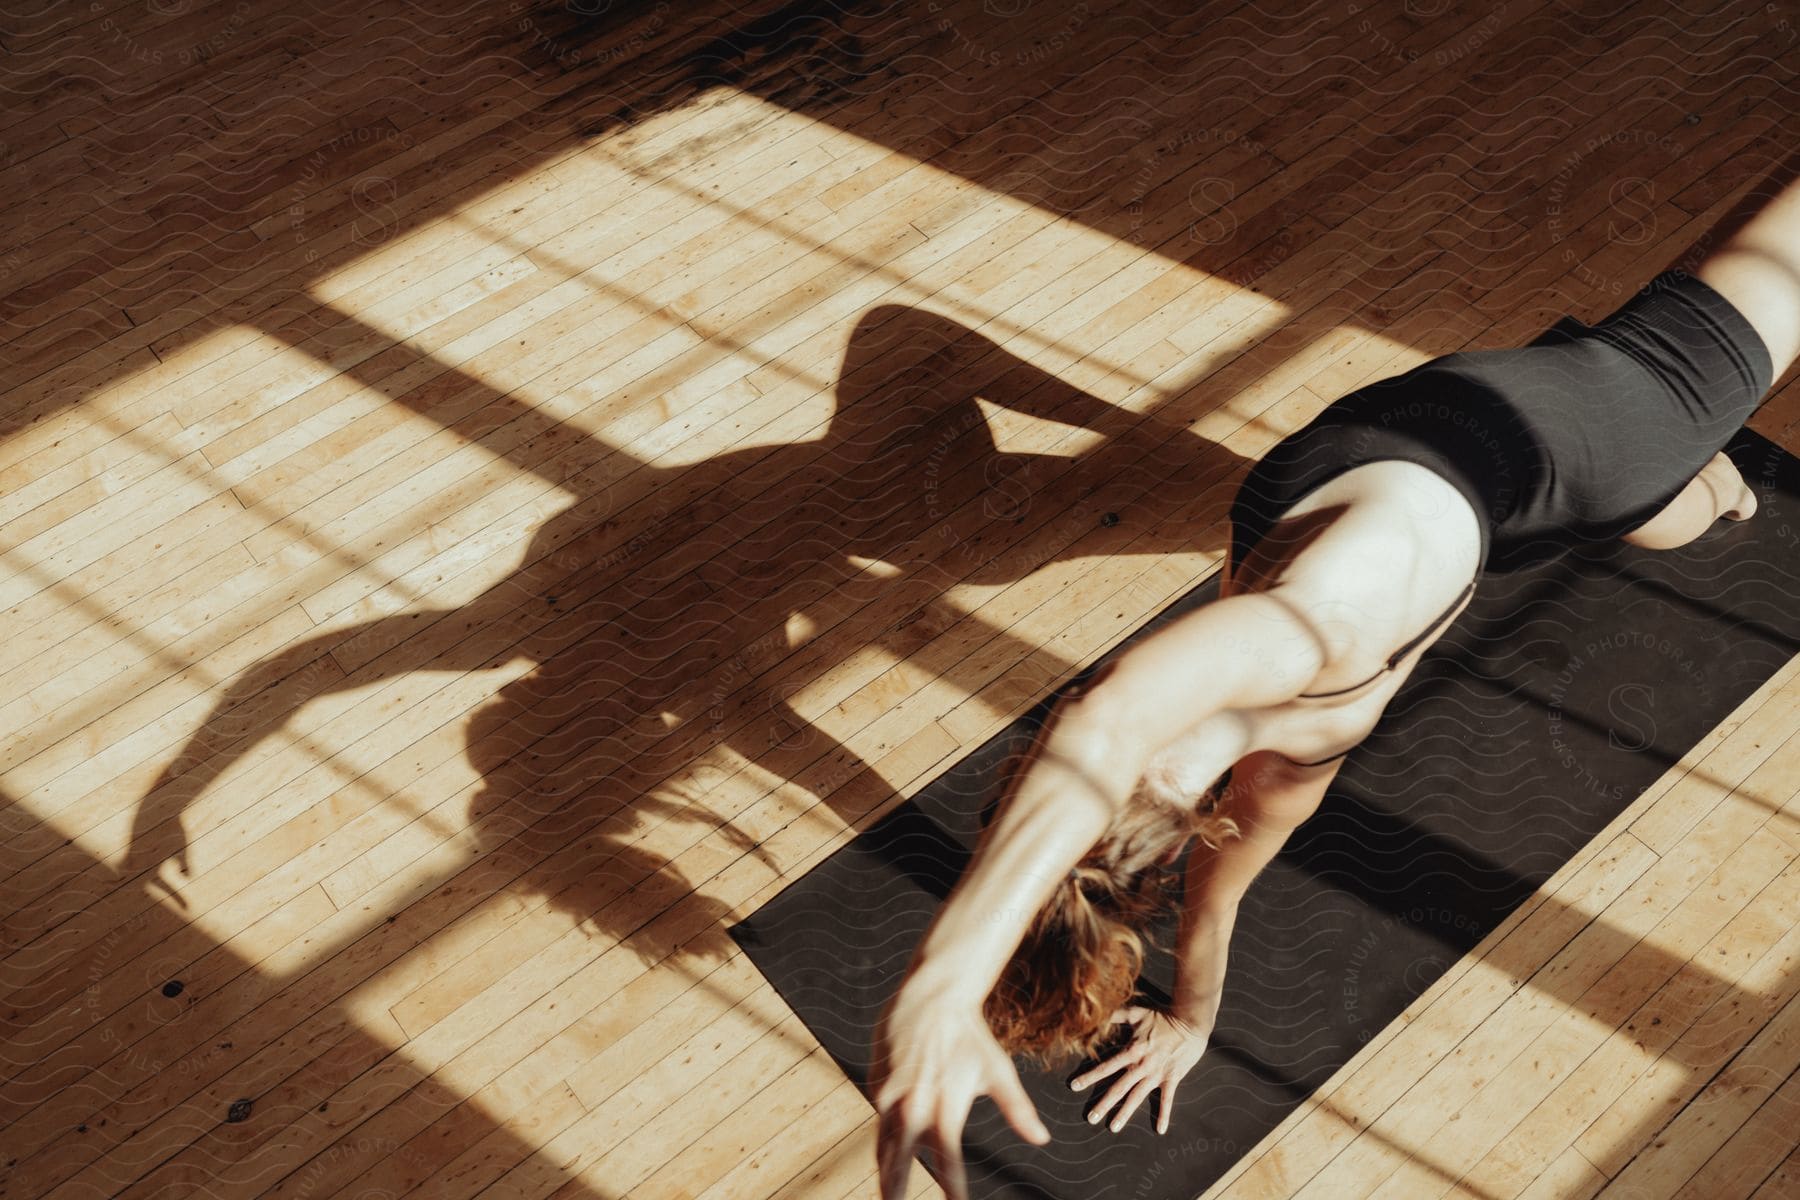 A woman is stretching on an exercise mat with an arm and a leg in the air as her shadow reflects on the floor